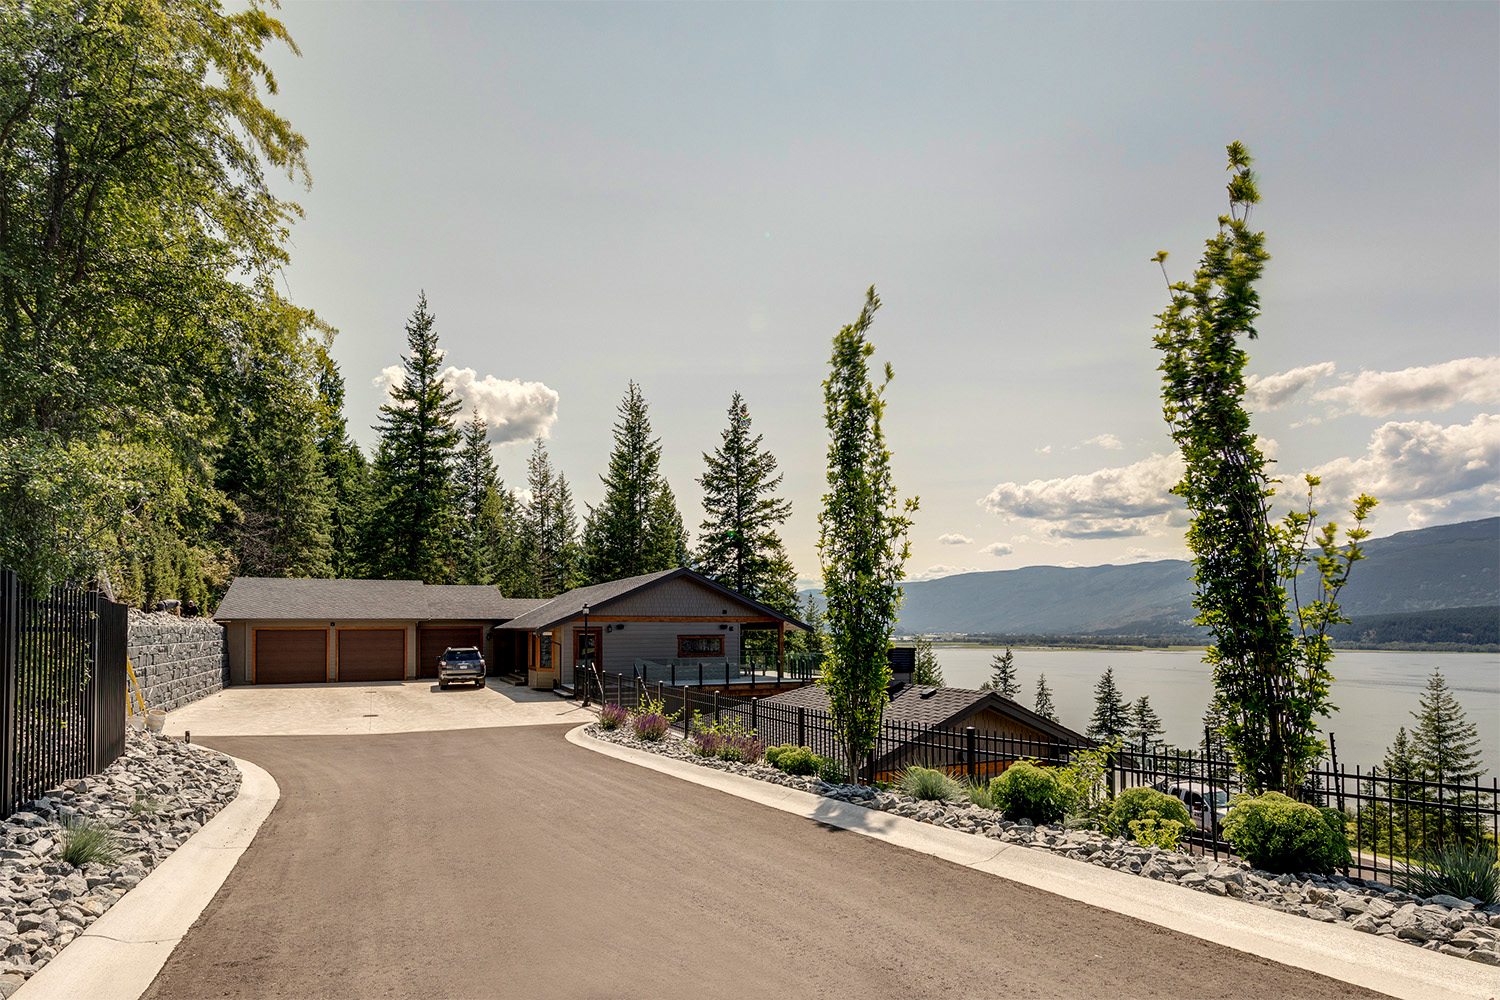 private driveway to upper garage of custom built home on hillside with dream view of nature